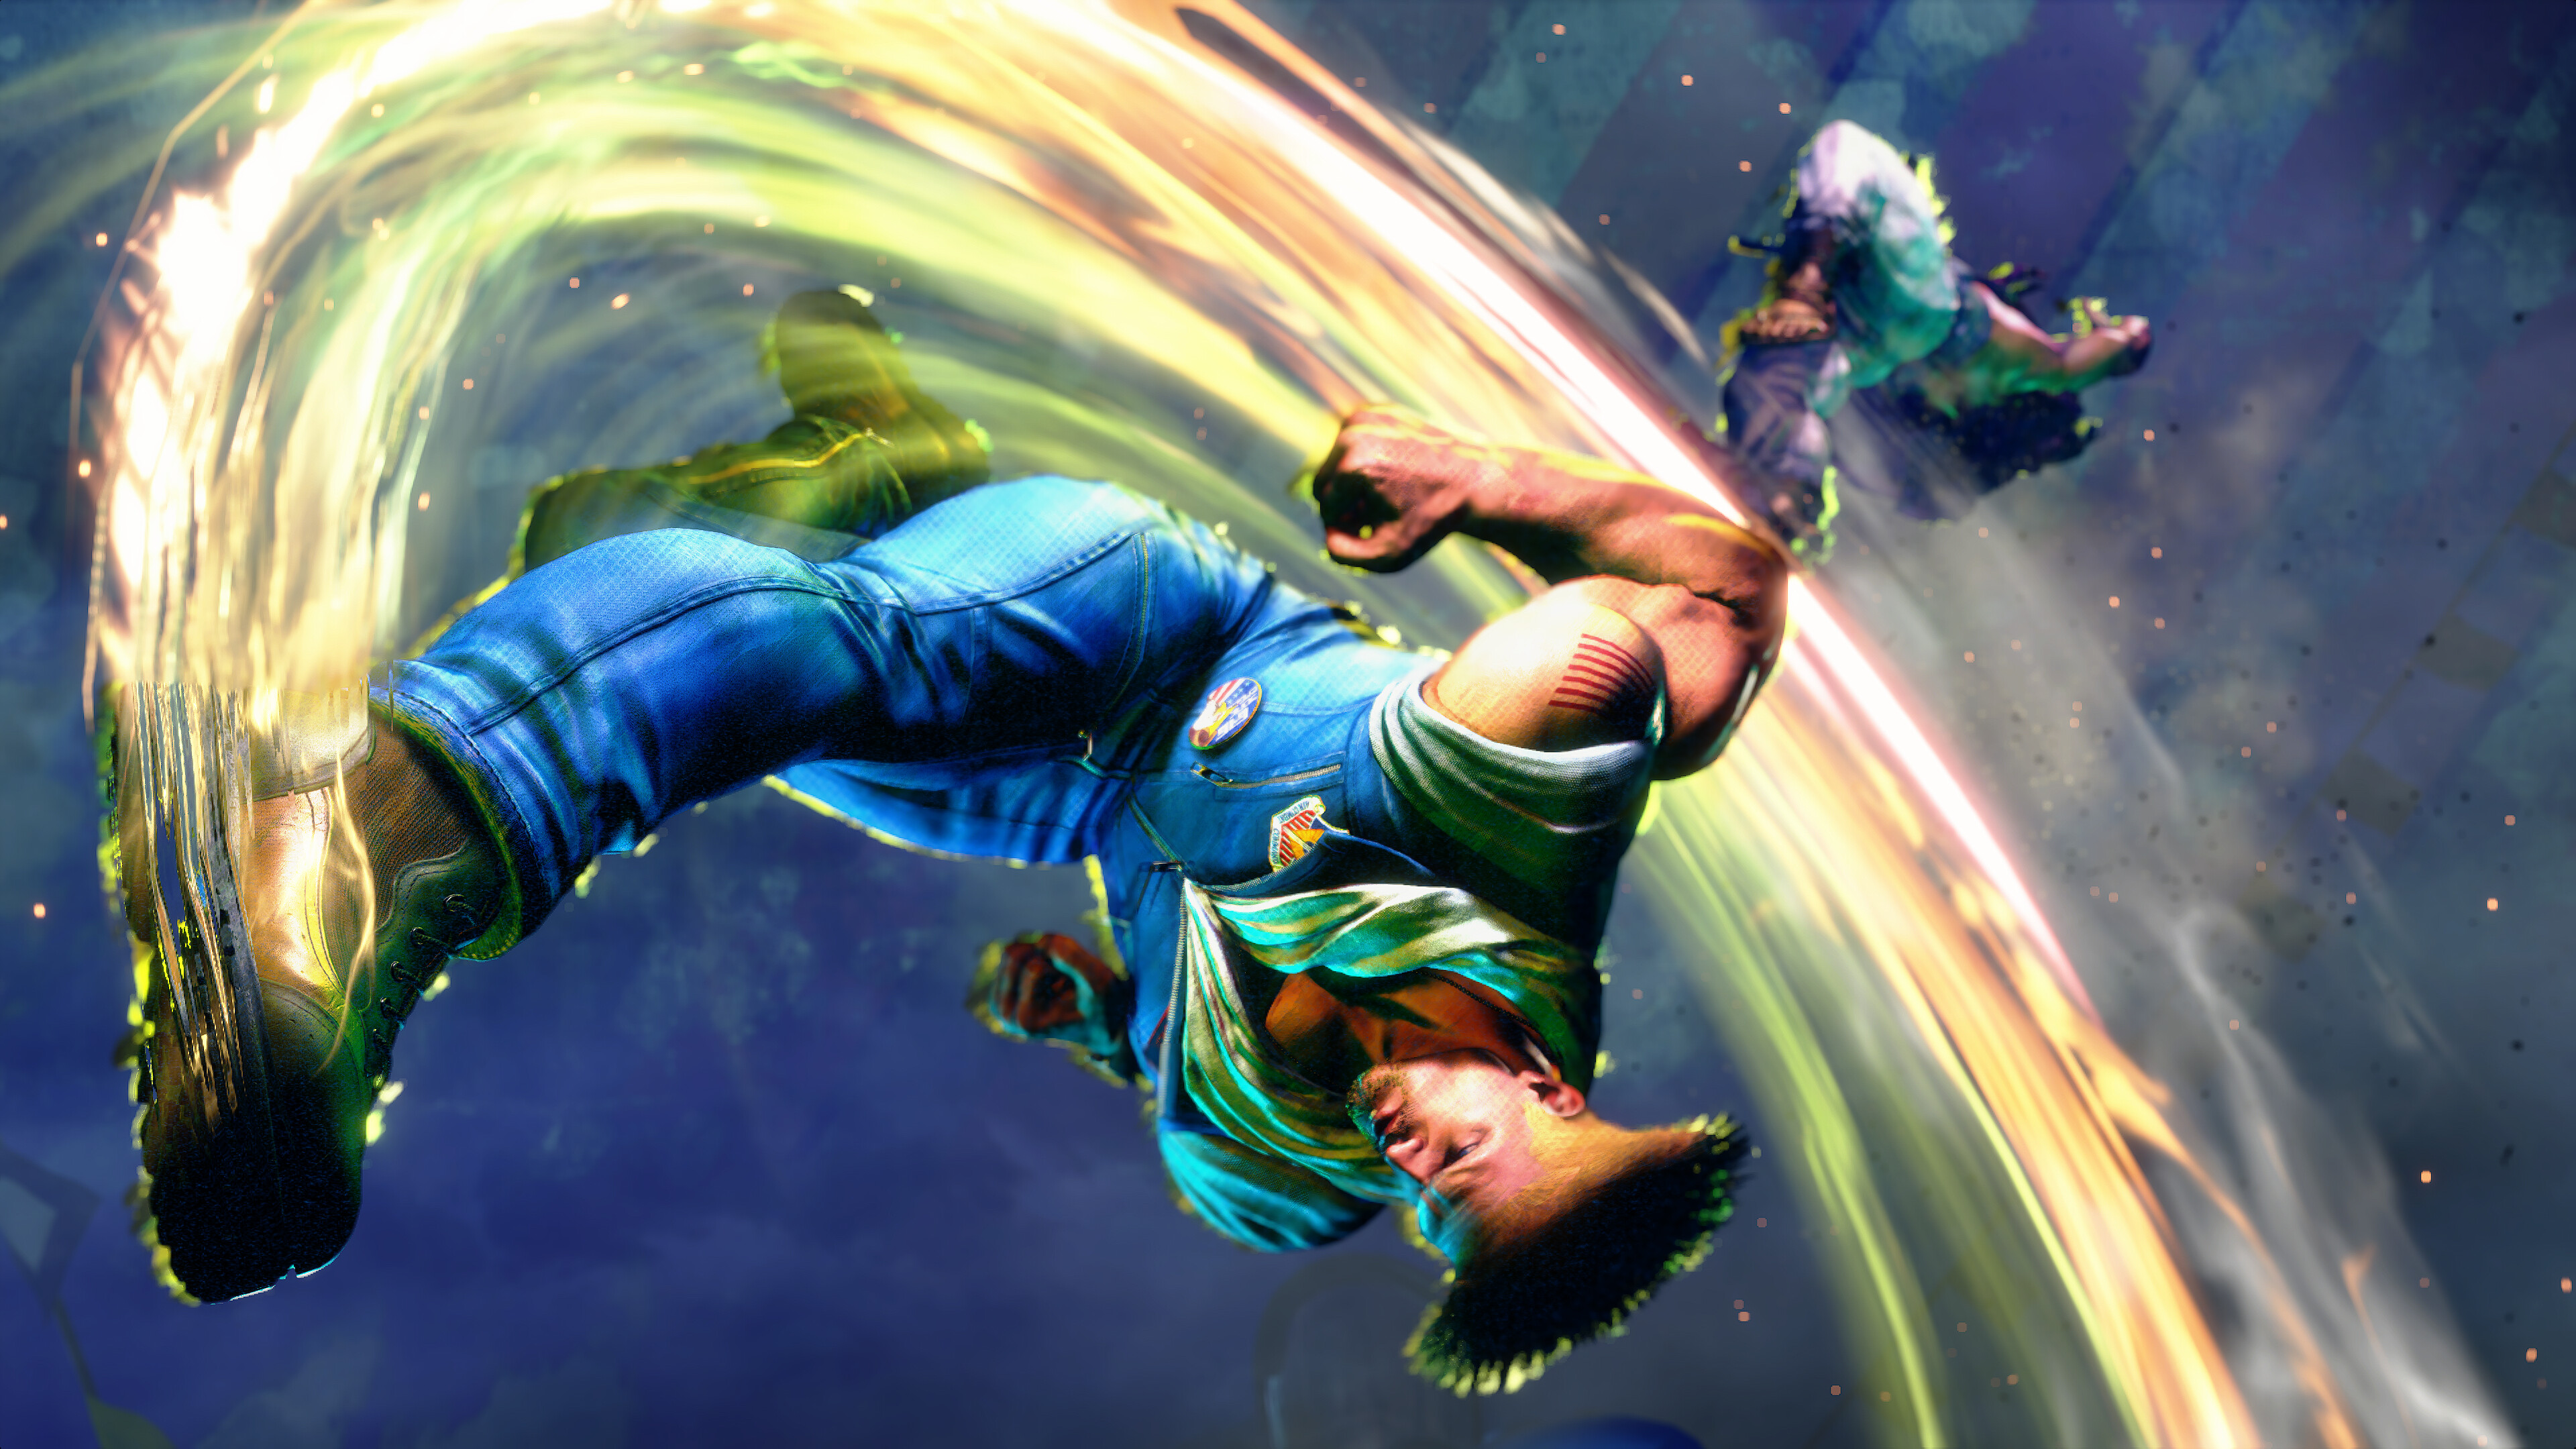 Guile launches Ryu into the air with a Sonic Kick in Street Fighter 6 